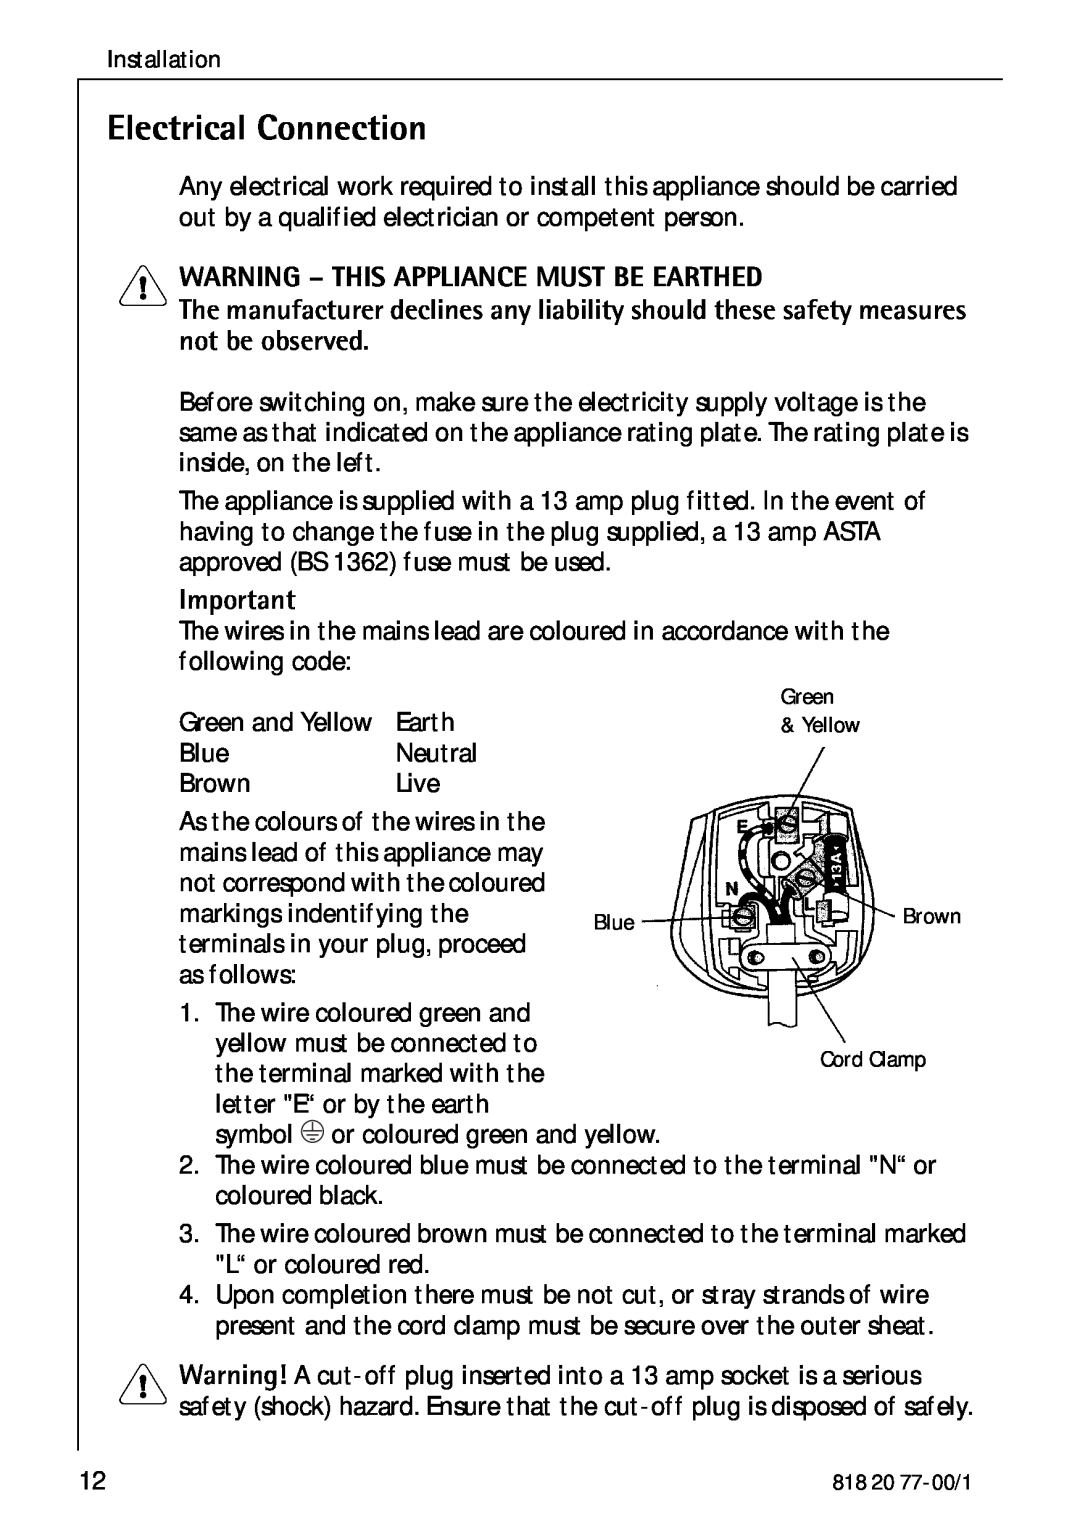 Electrolux 3985-7 KG manual Electrical Connection, Warning - This Appliance Must Be Earthed 